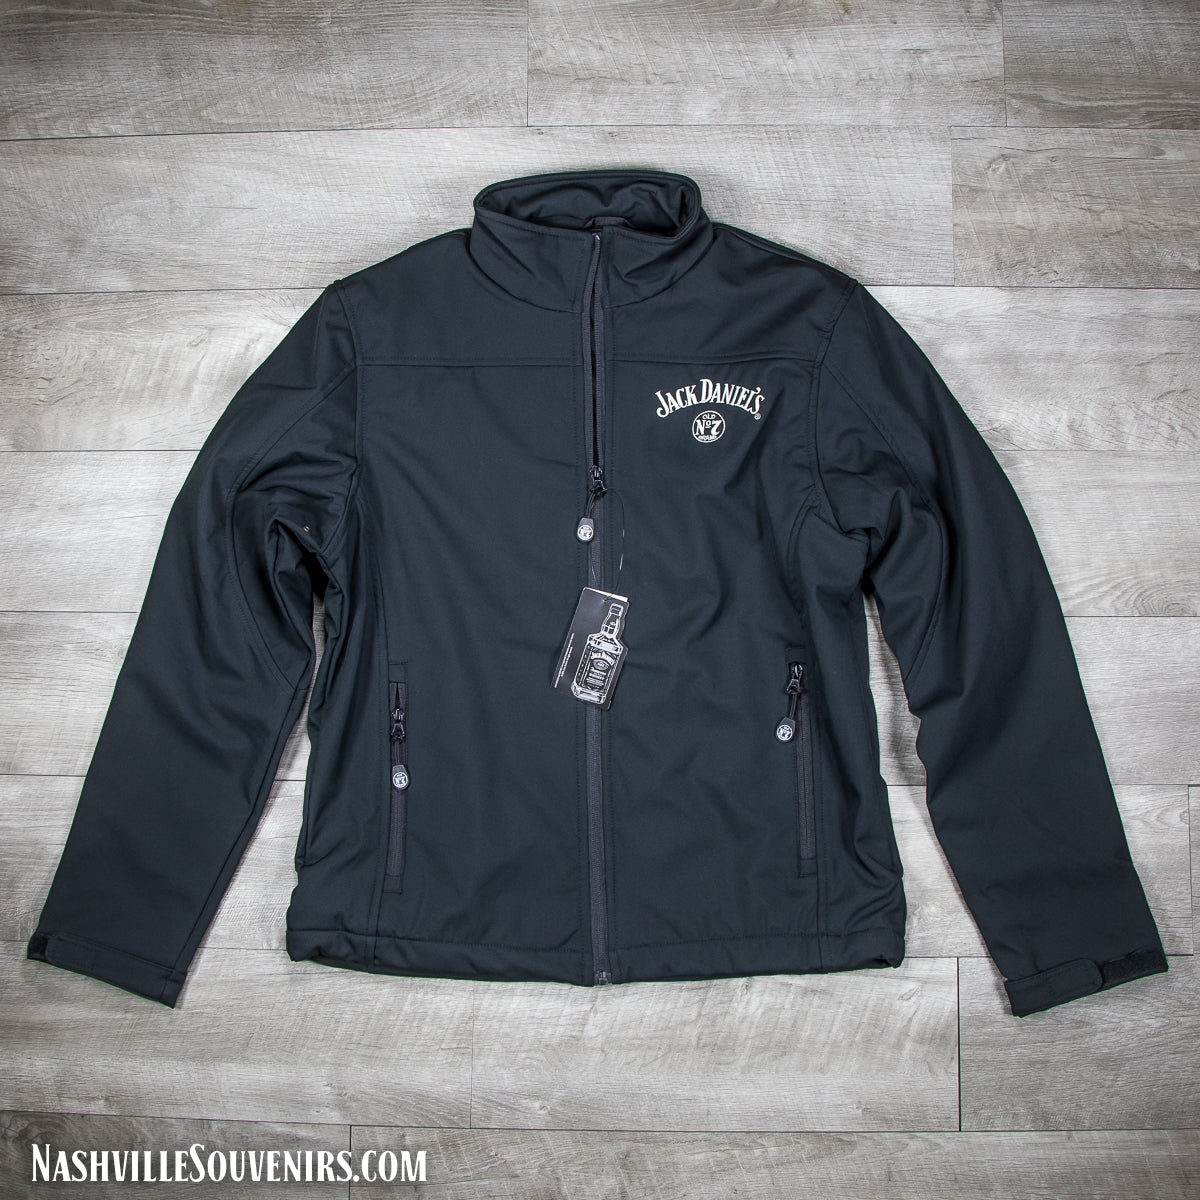 Officially licensed Jack Daniels Zip Soft Shell Black Jacket is made of soft shell polyester with a zip-up front. Has Jack Daniels Swing and Bug embroidered logo on the front left chest. Get yours today with FREE SHIPPING on all US orders over $75!